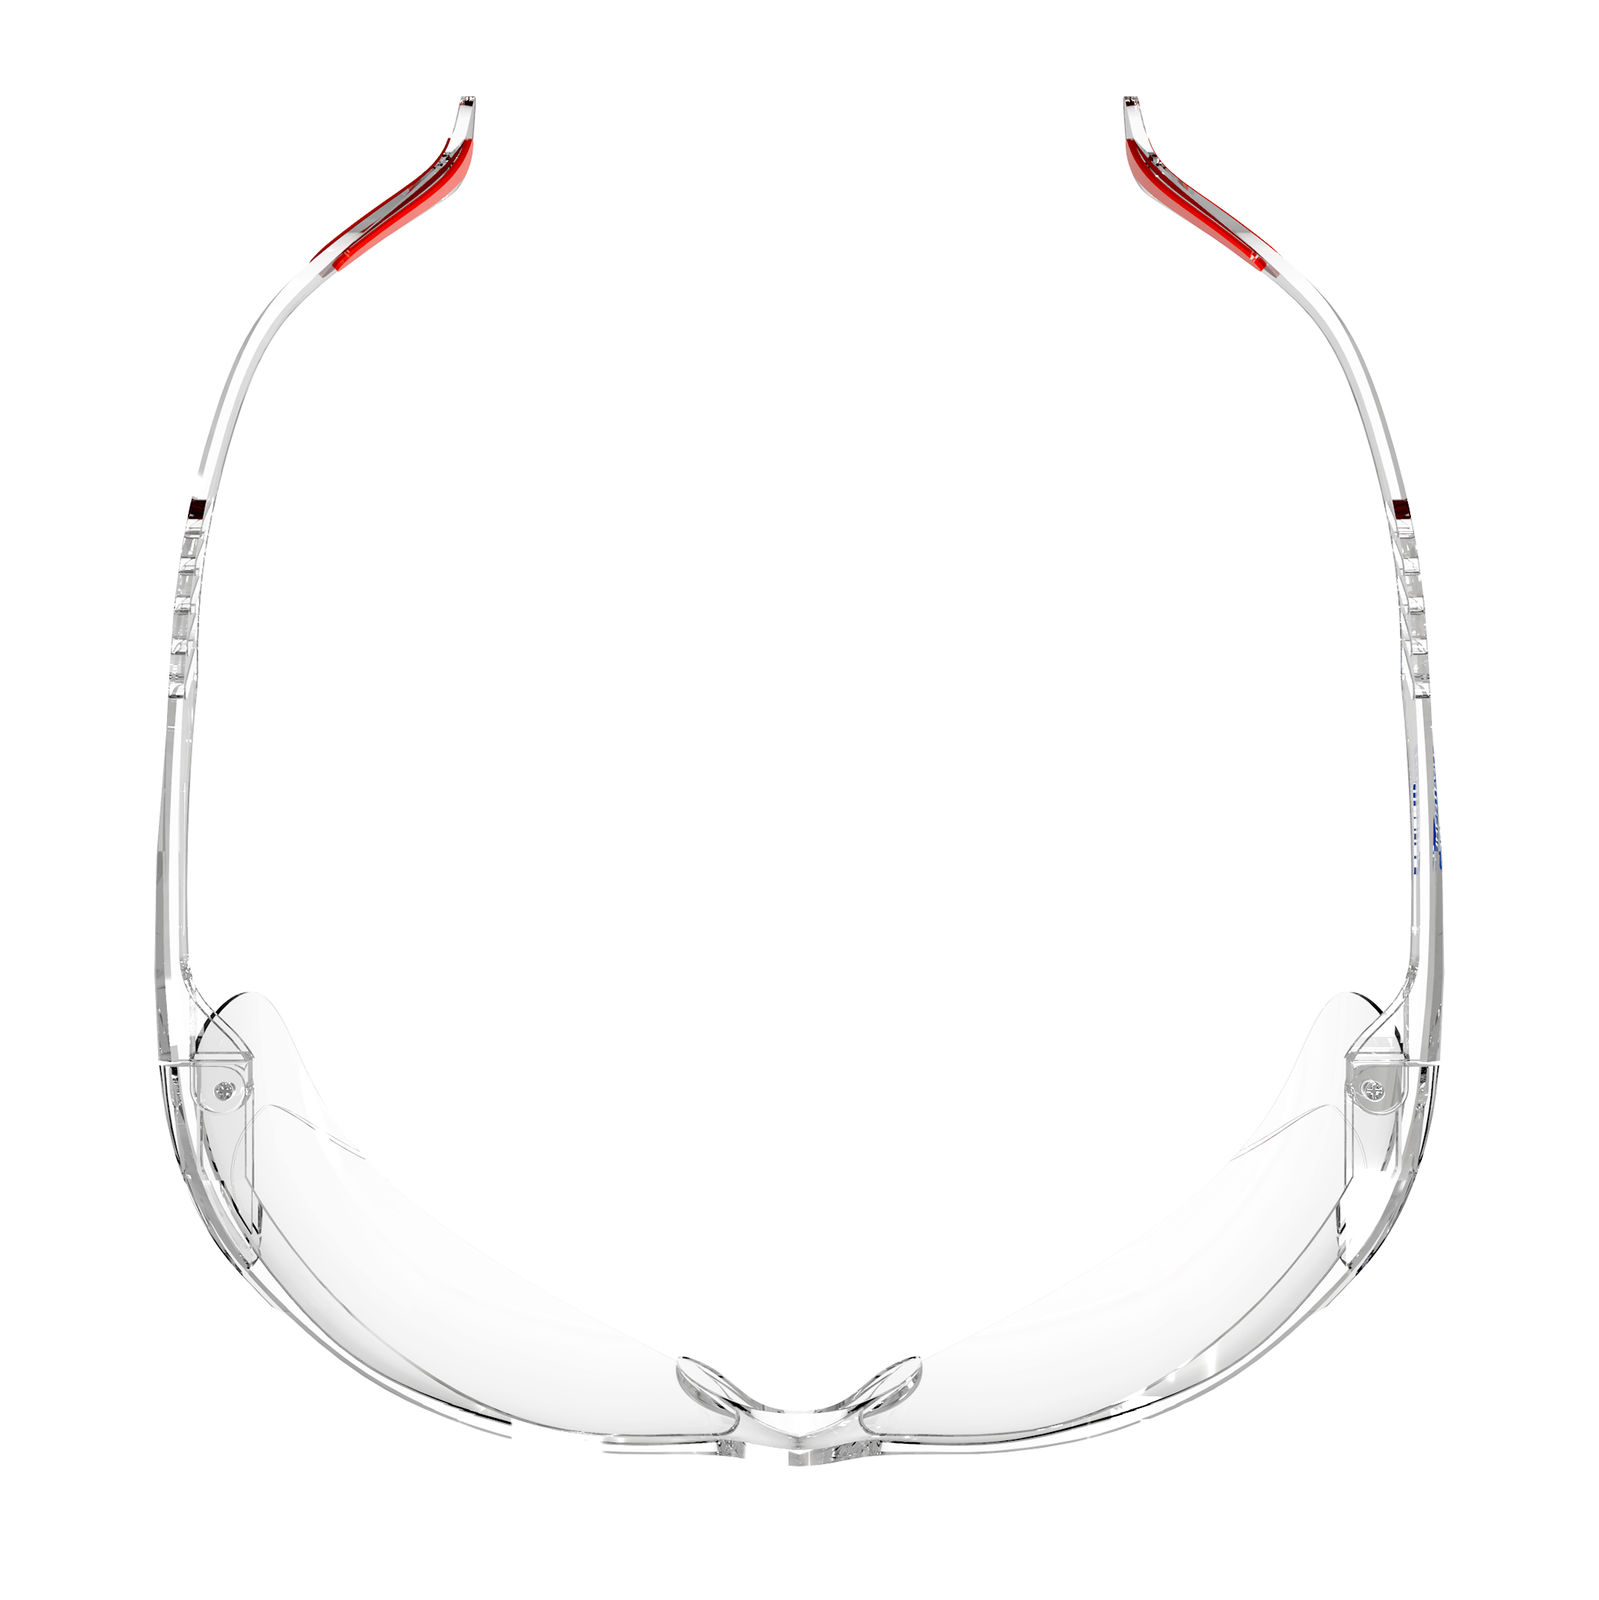 Top view of the clear JORESTECH panoramic safety glass for high impact protection.  Temples of this ANSI compliant glasses have details in red. 